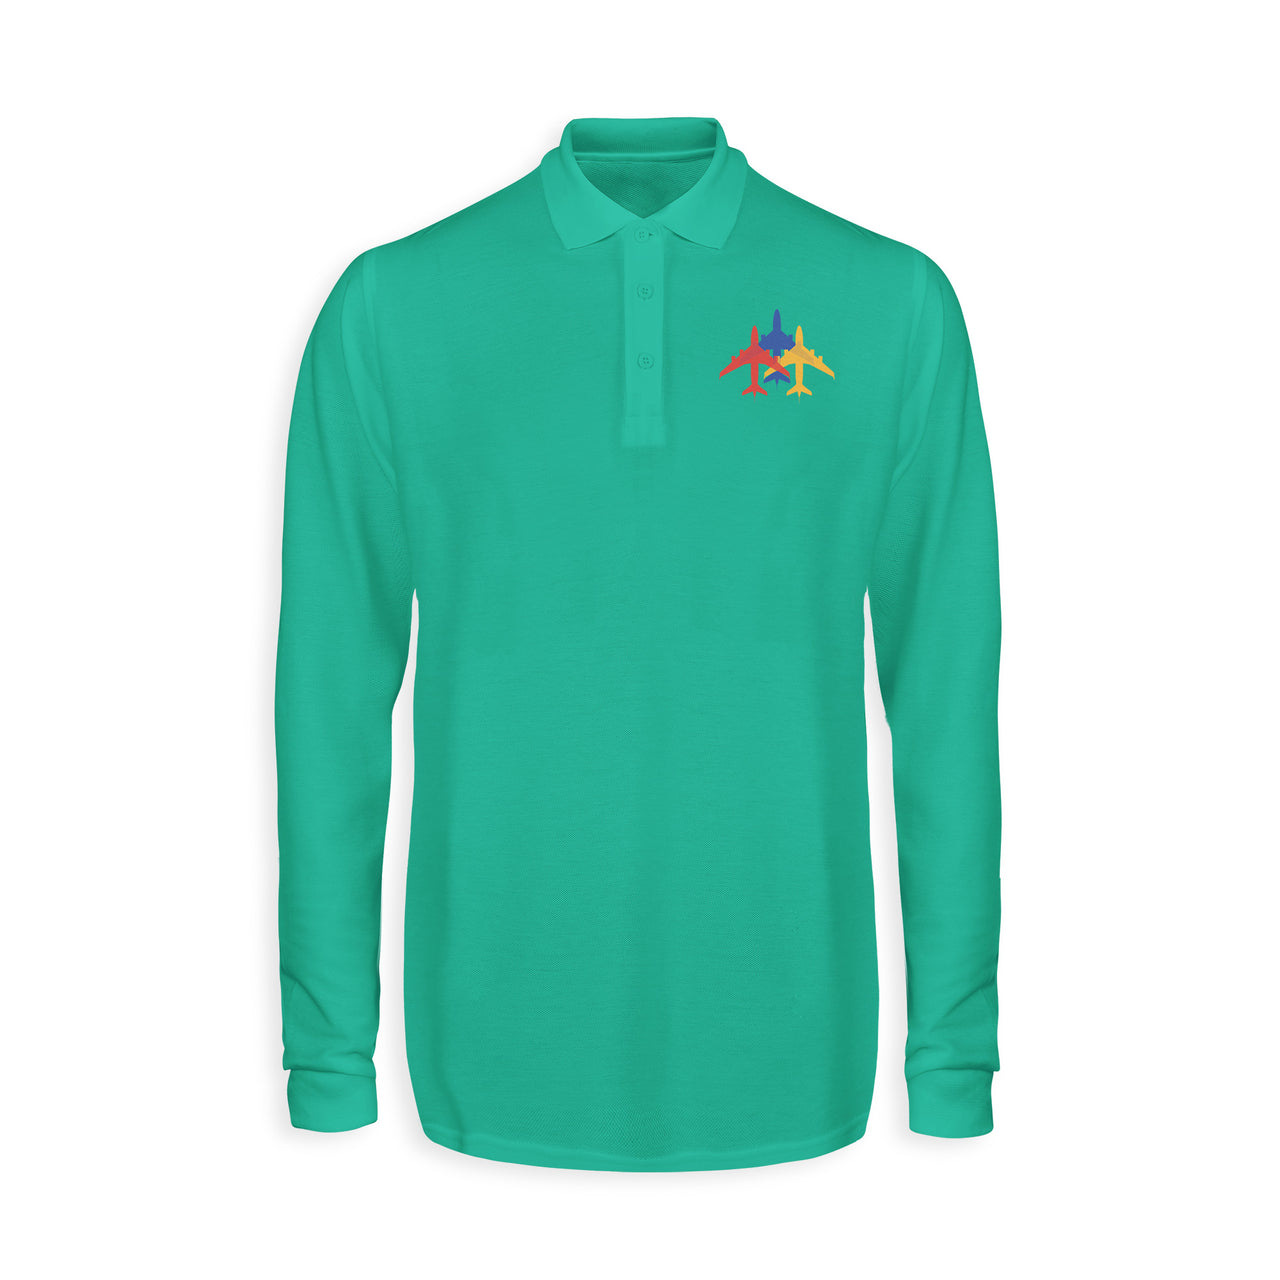 Colourful 3 Airplanes Designed Long Sleeve Polo T-Shirts